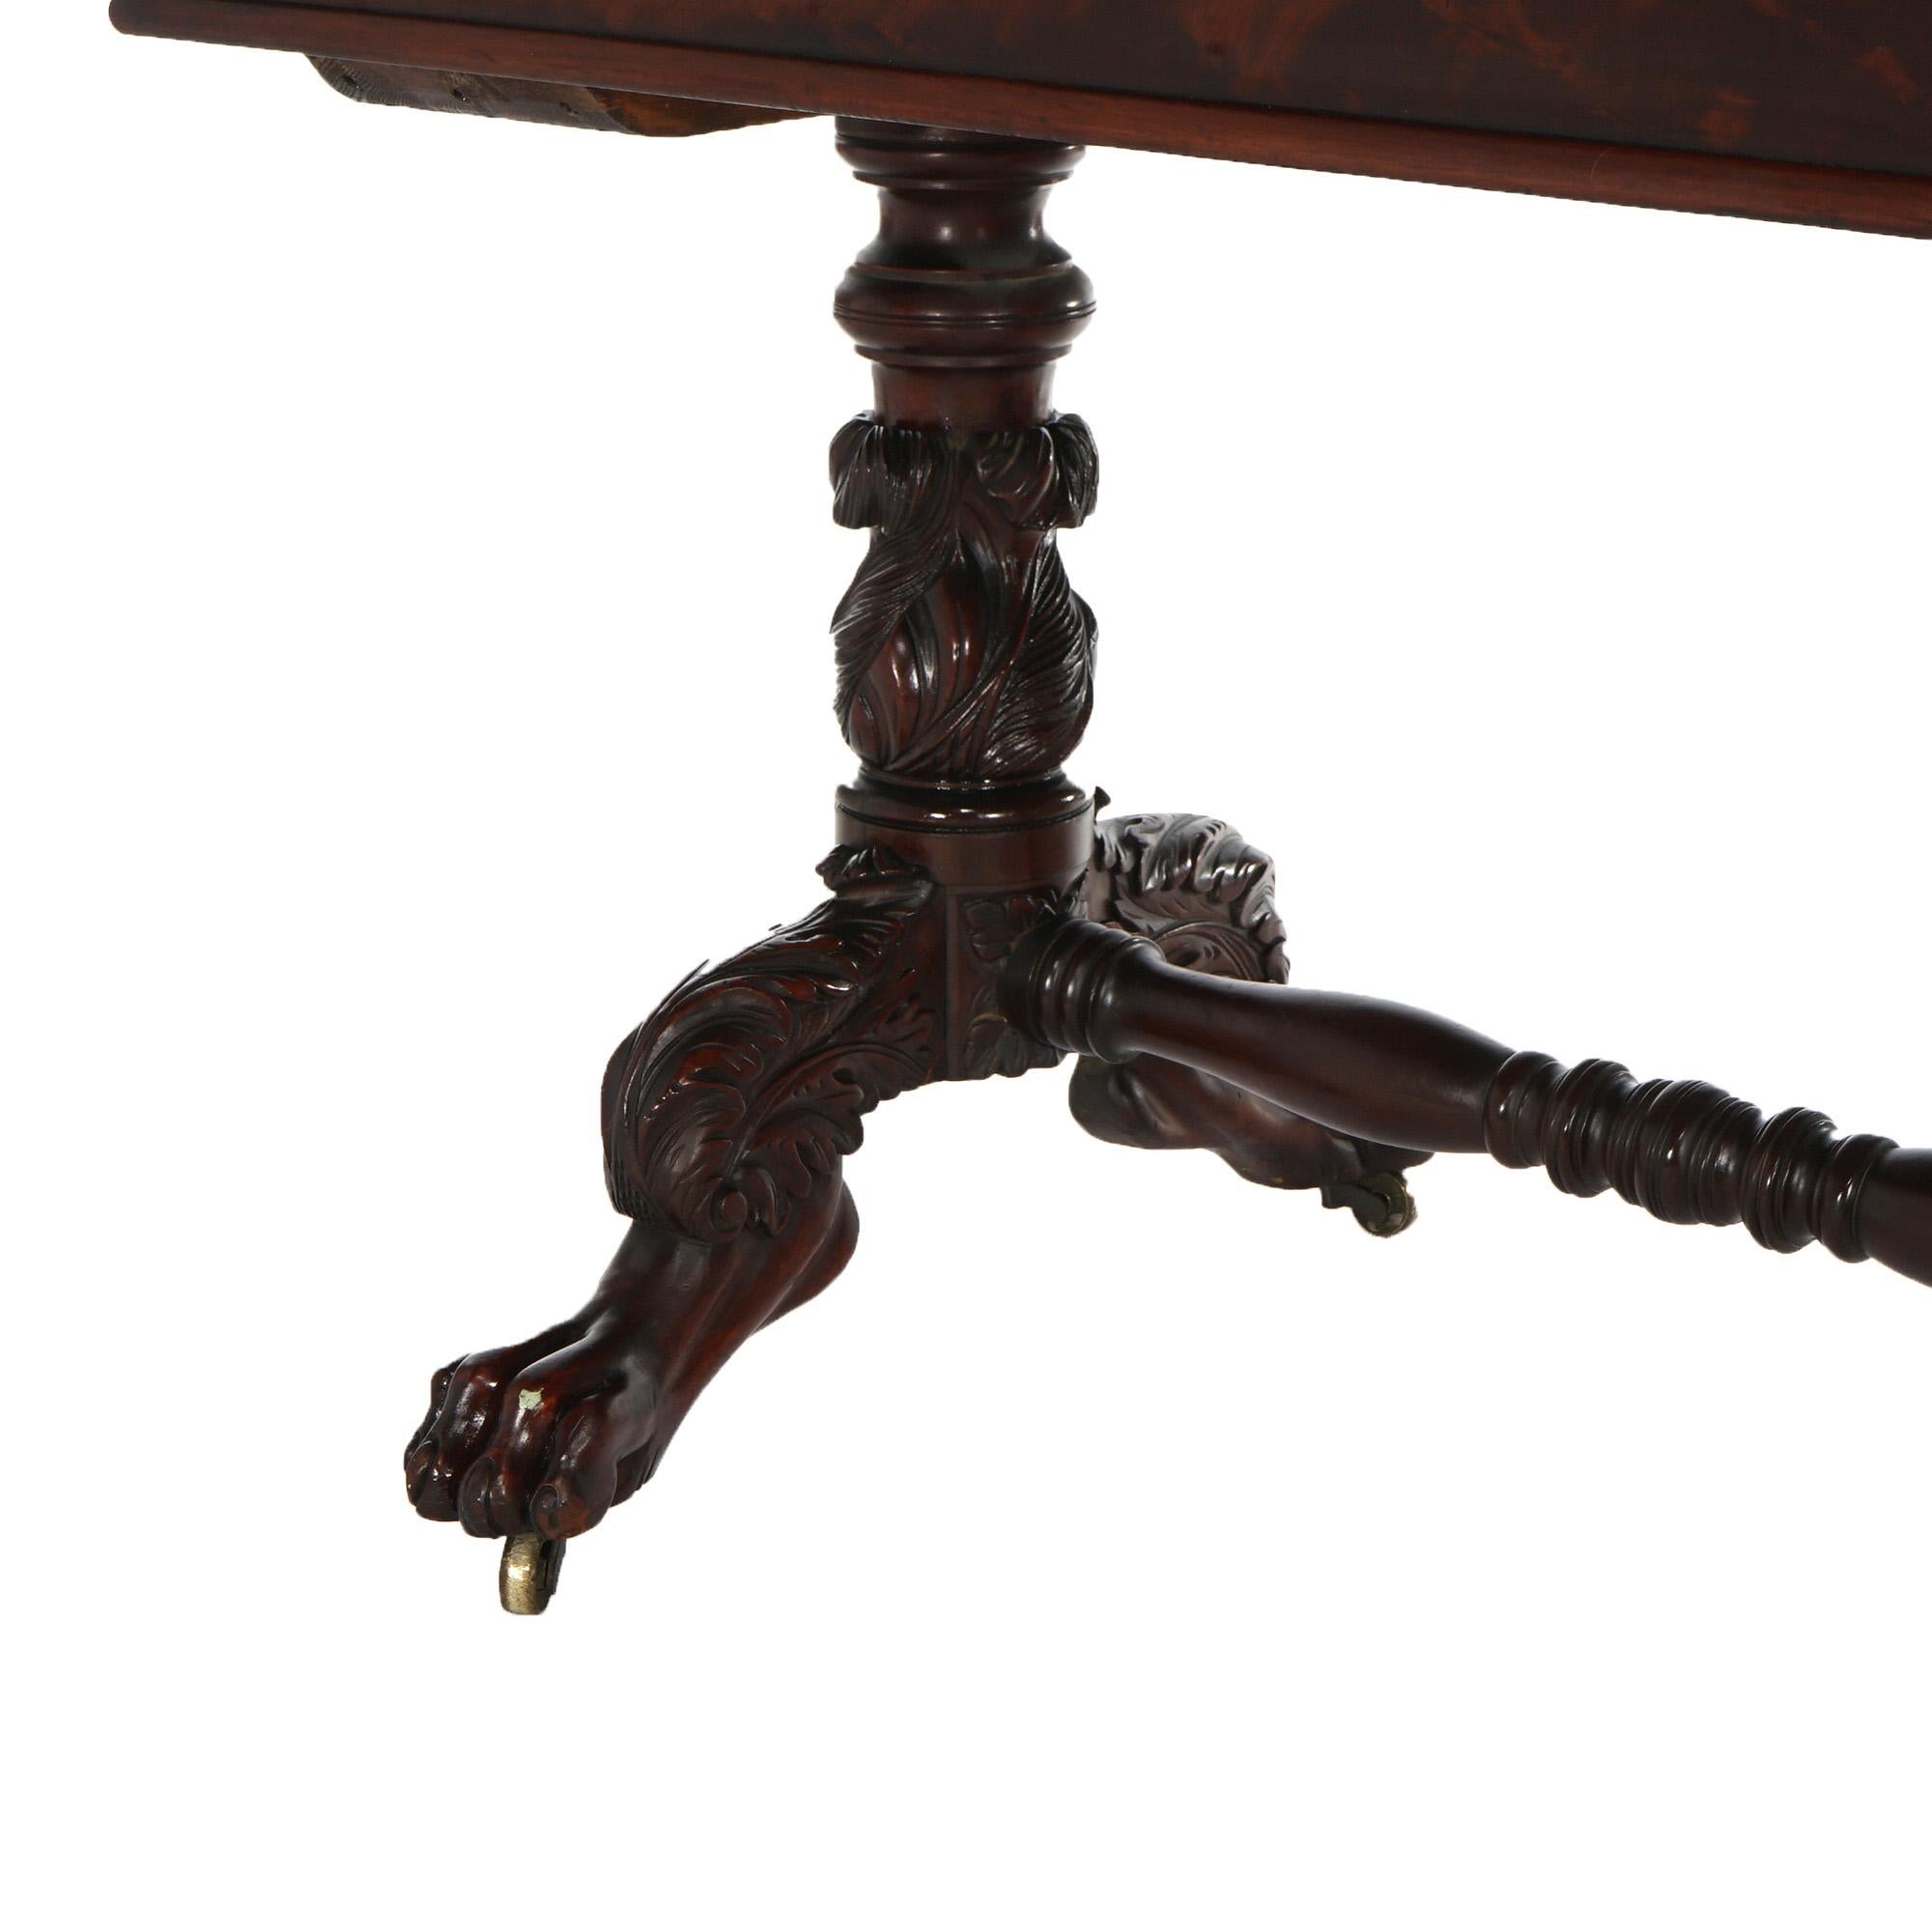 Antique American Empire Flame Mahogany Sofa Table, Carved Acanthus & Paws, C1840 For Sale 1